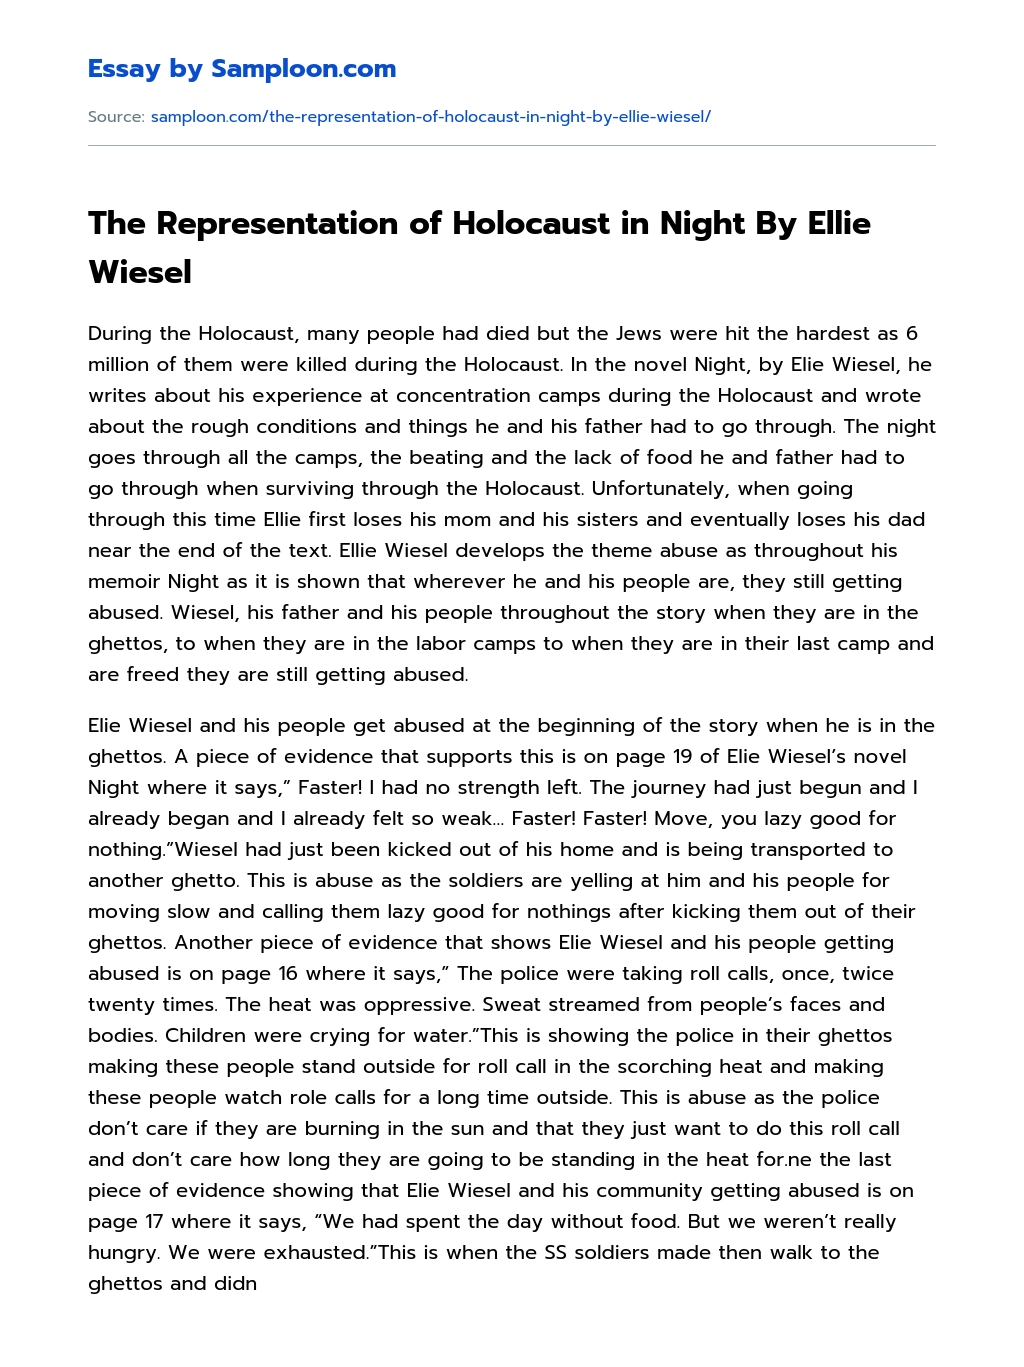 The Representation of Holocaust in Night By Ellie Wiesel essay